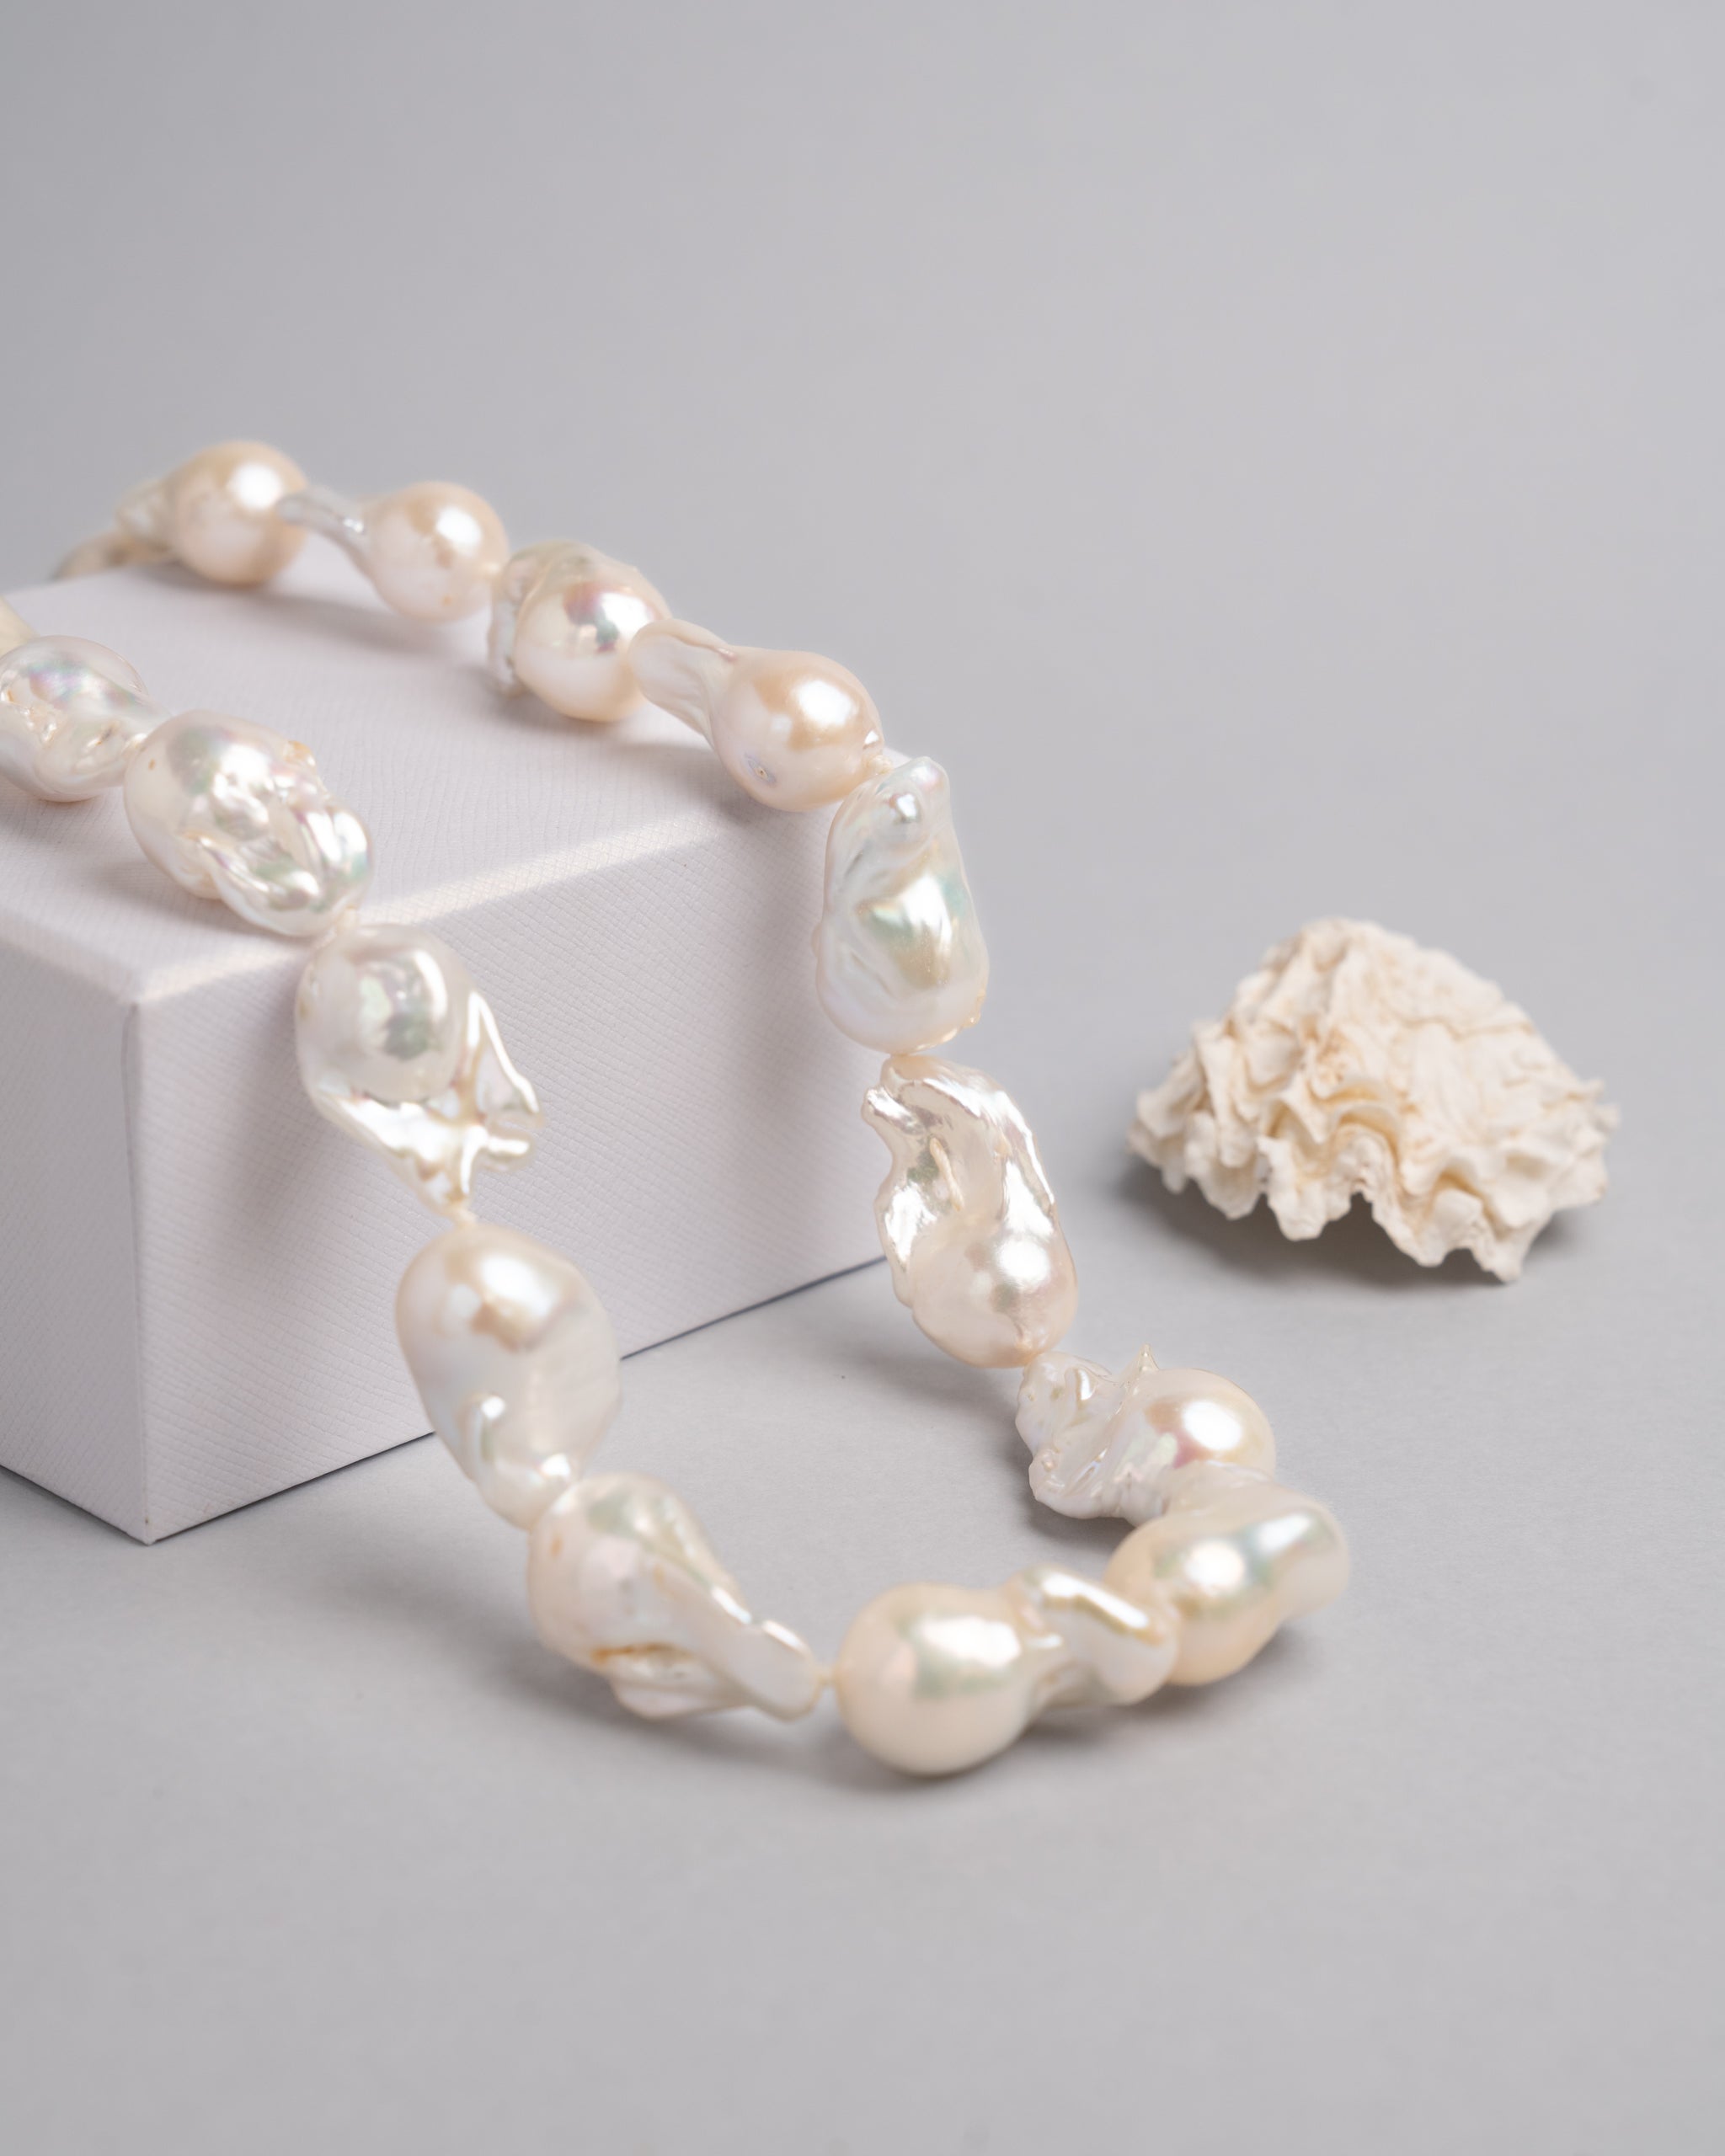 Freshwater Fireball Pearl Necklace 13-15mm, 45cm.